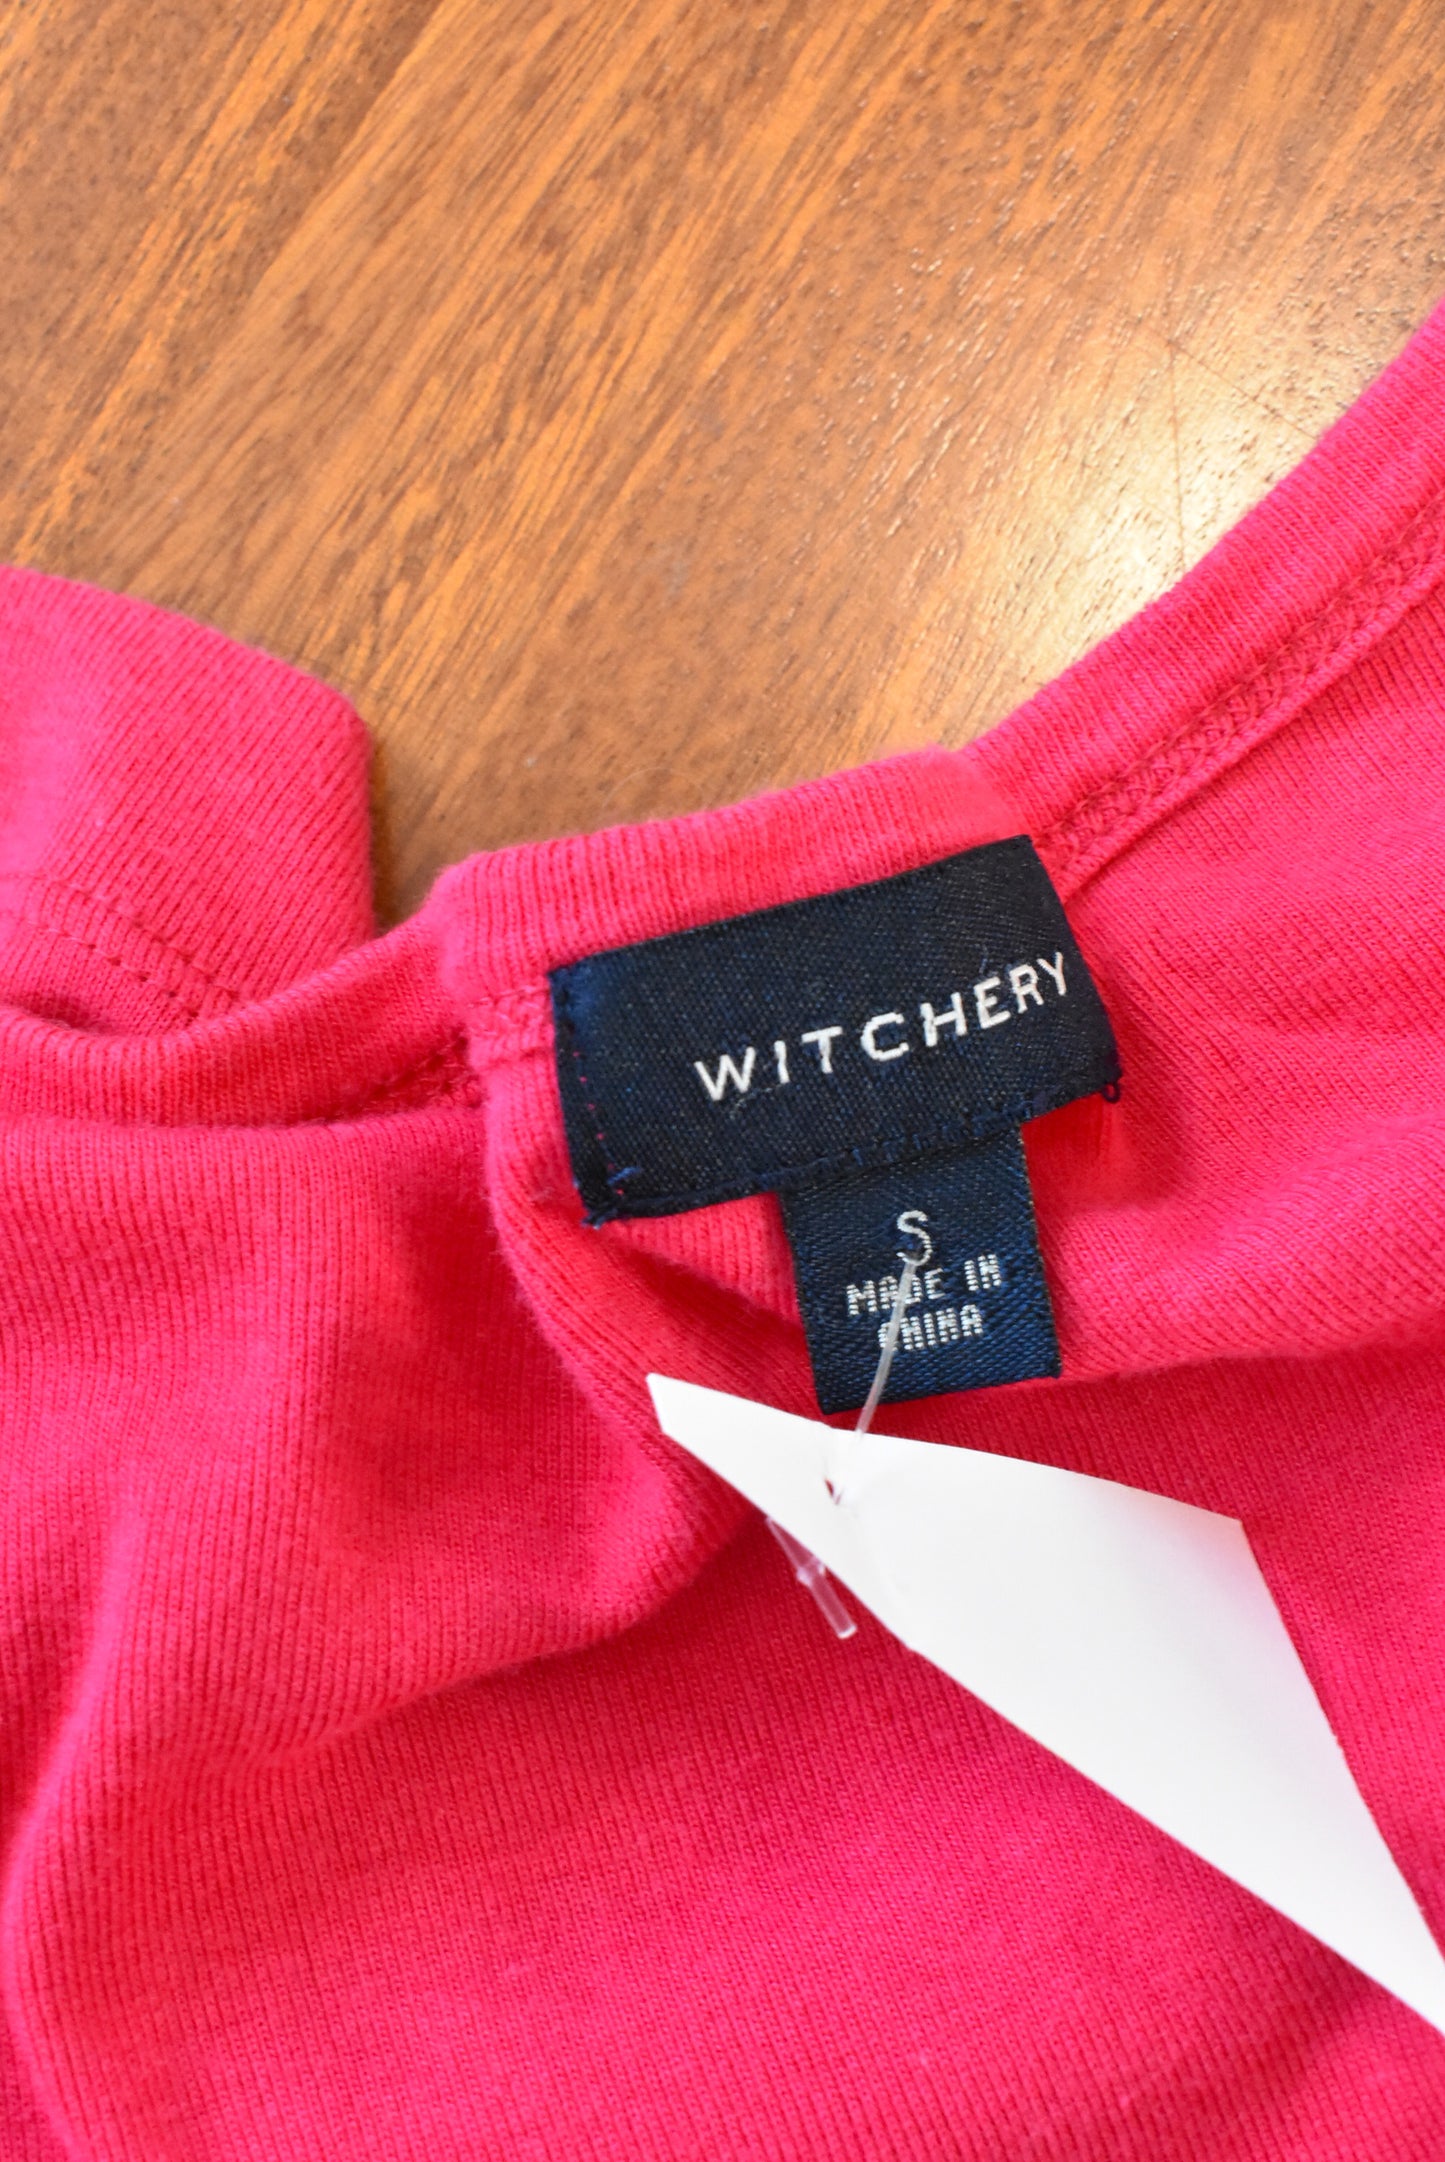 Witchery hot pink top, S